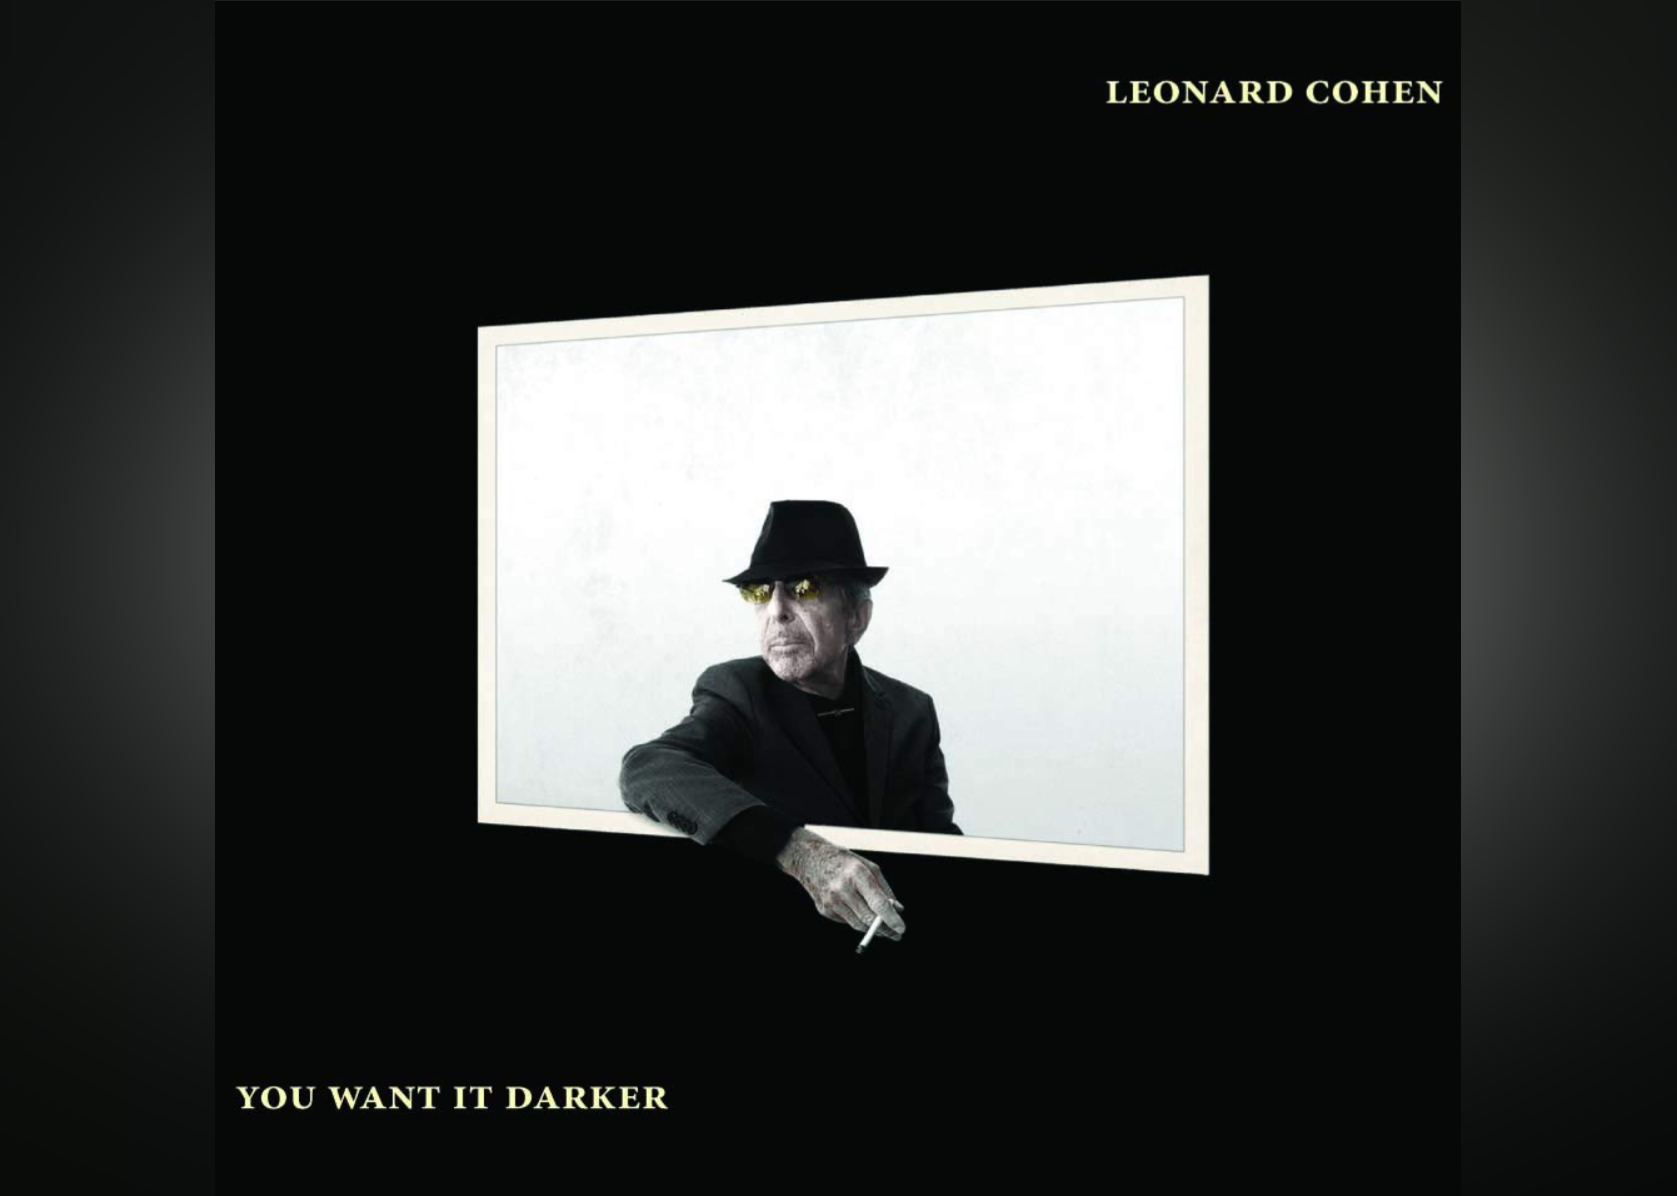 Leonard Cohen in all black and wearing a hat with his arm out of a window holding a cigarette.